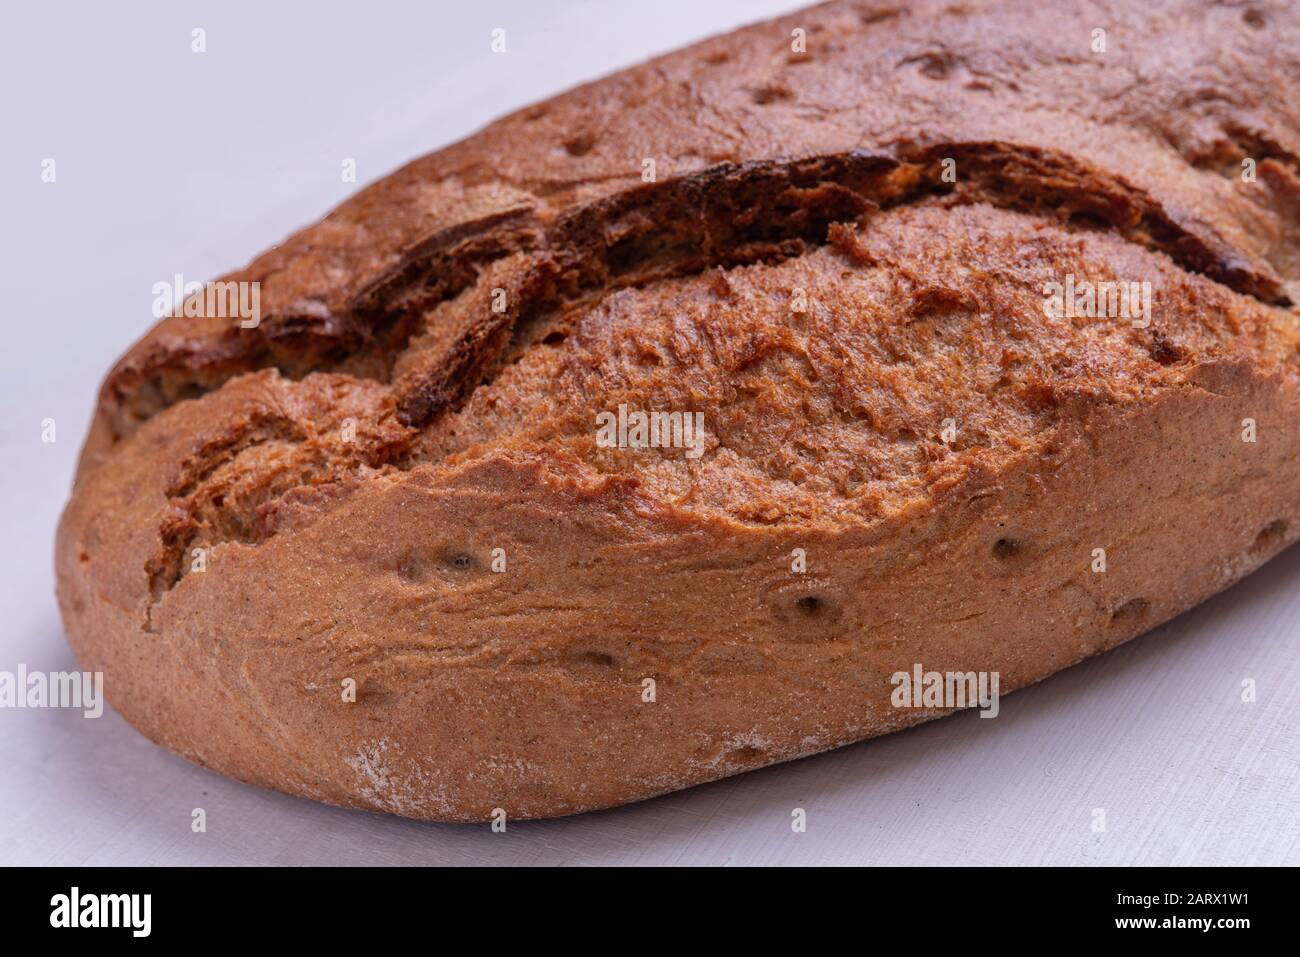 Variety of bread named 'Farm bread'   -  in German words 'Bauernbrot' Stock Photo